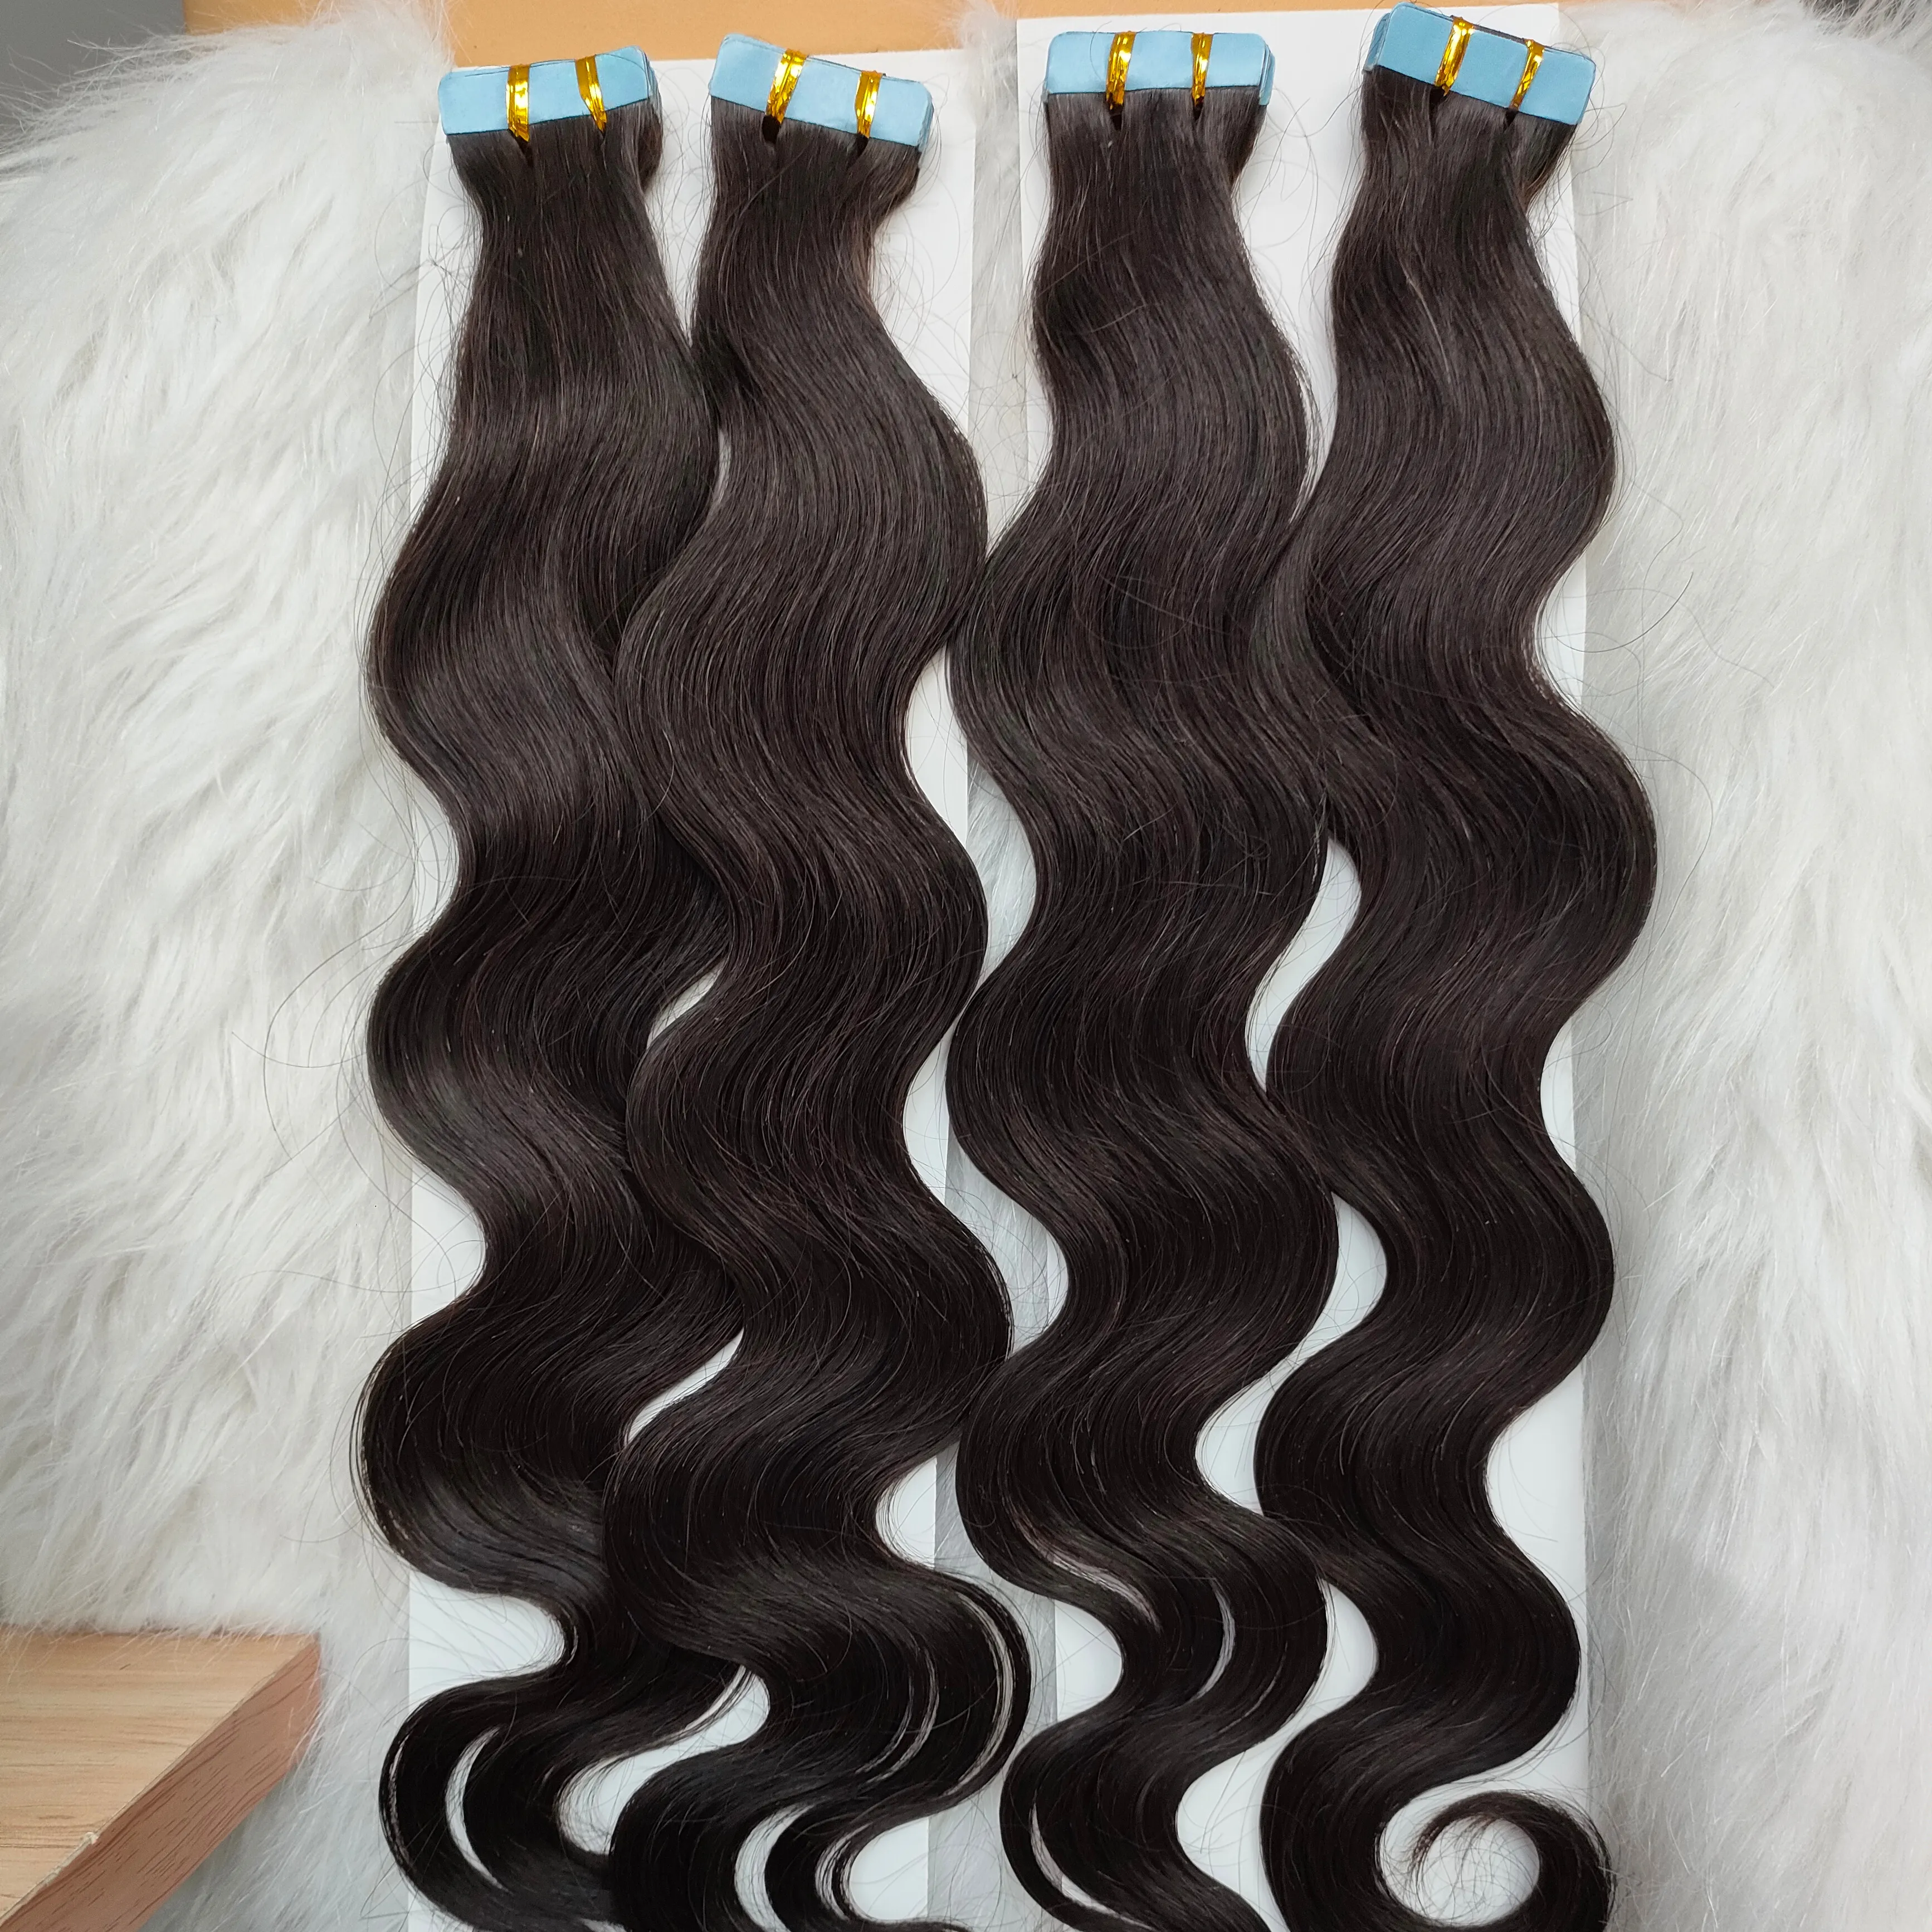 Amara Hair best selling tape ins human hair extensions body wave tape in 100 human hair body wave ready to ship for women